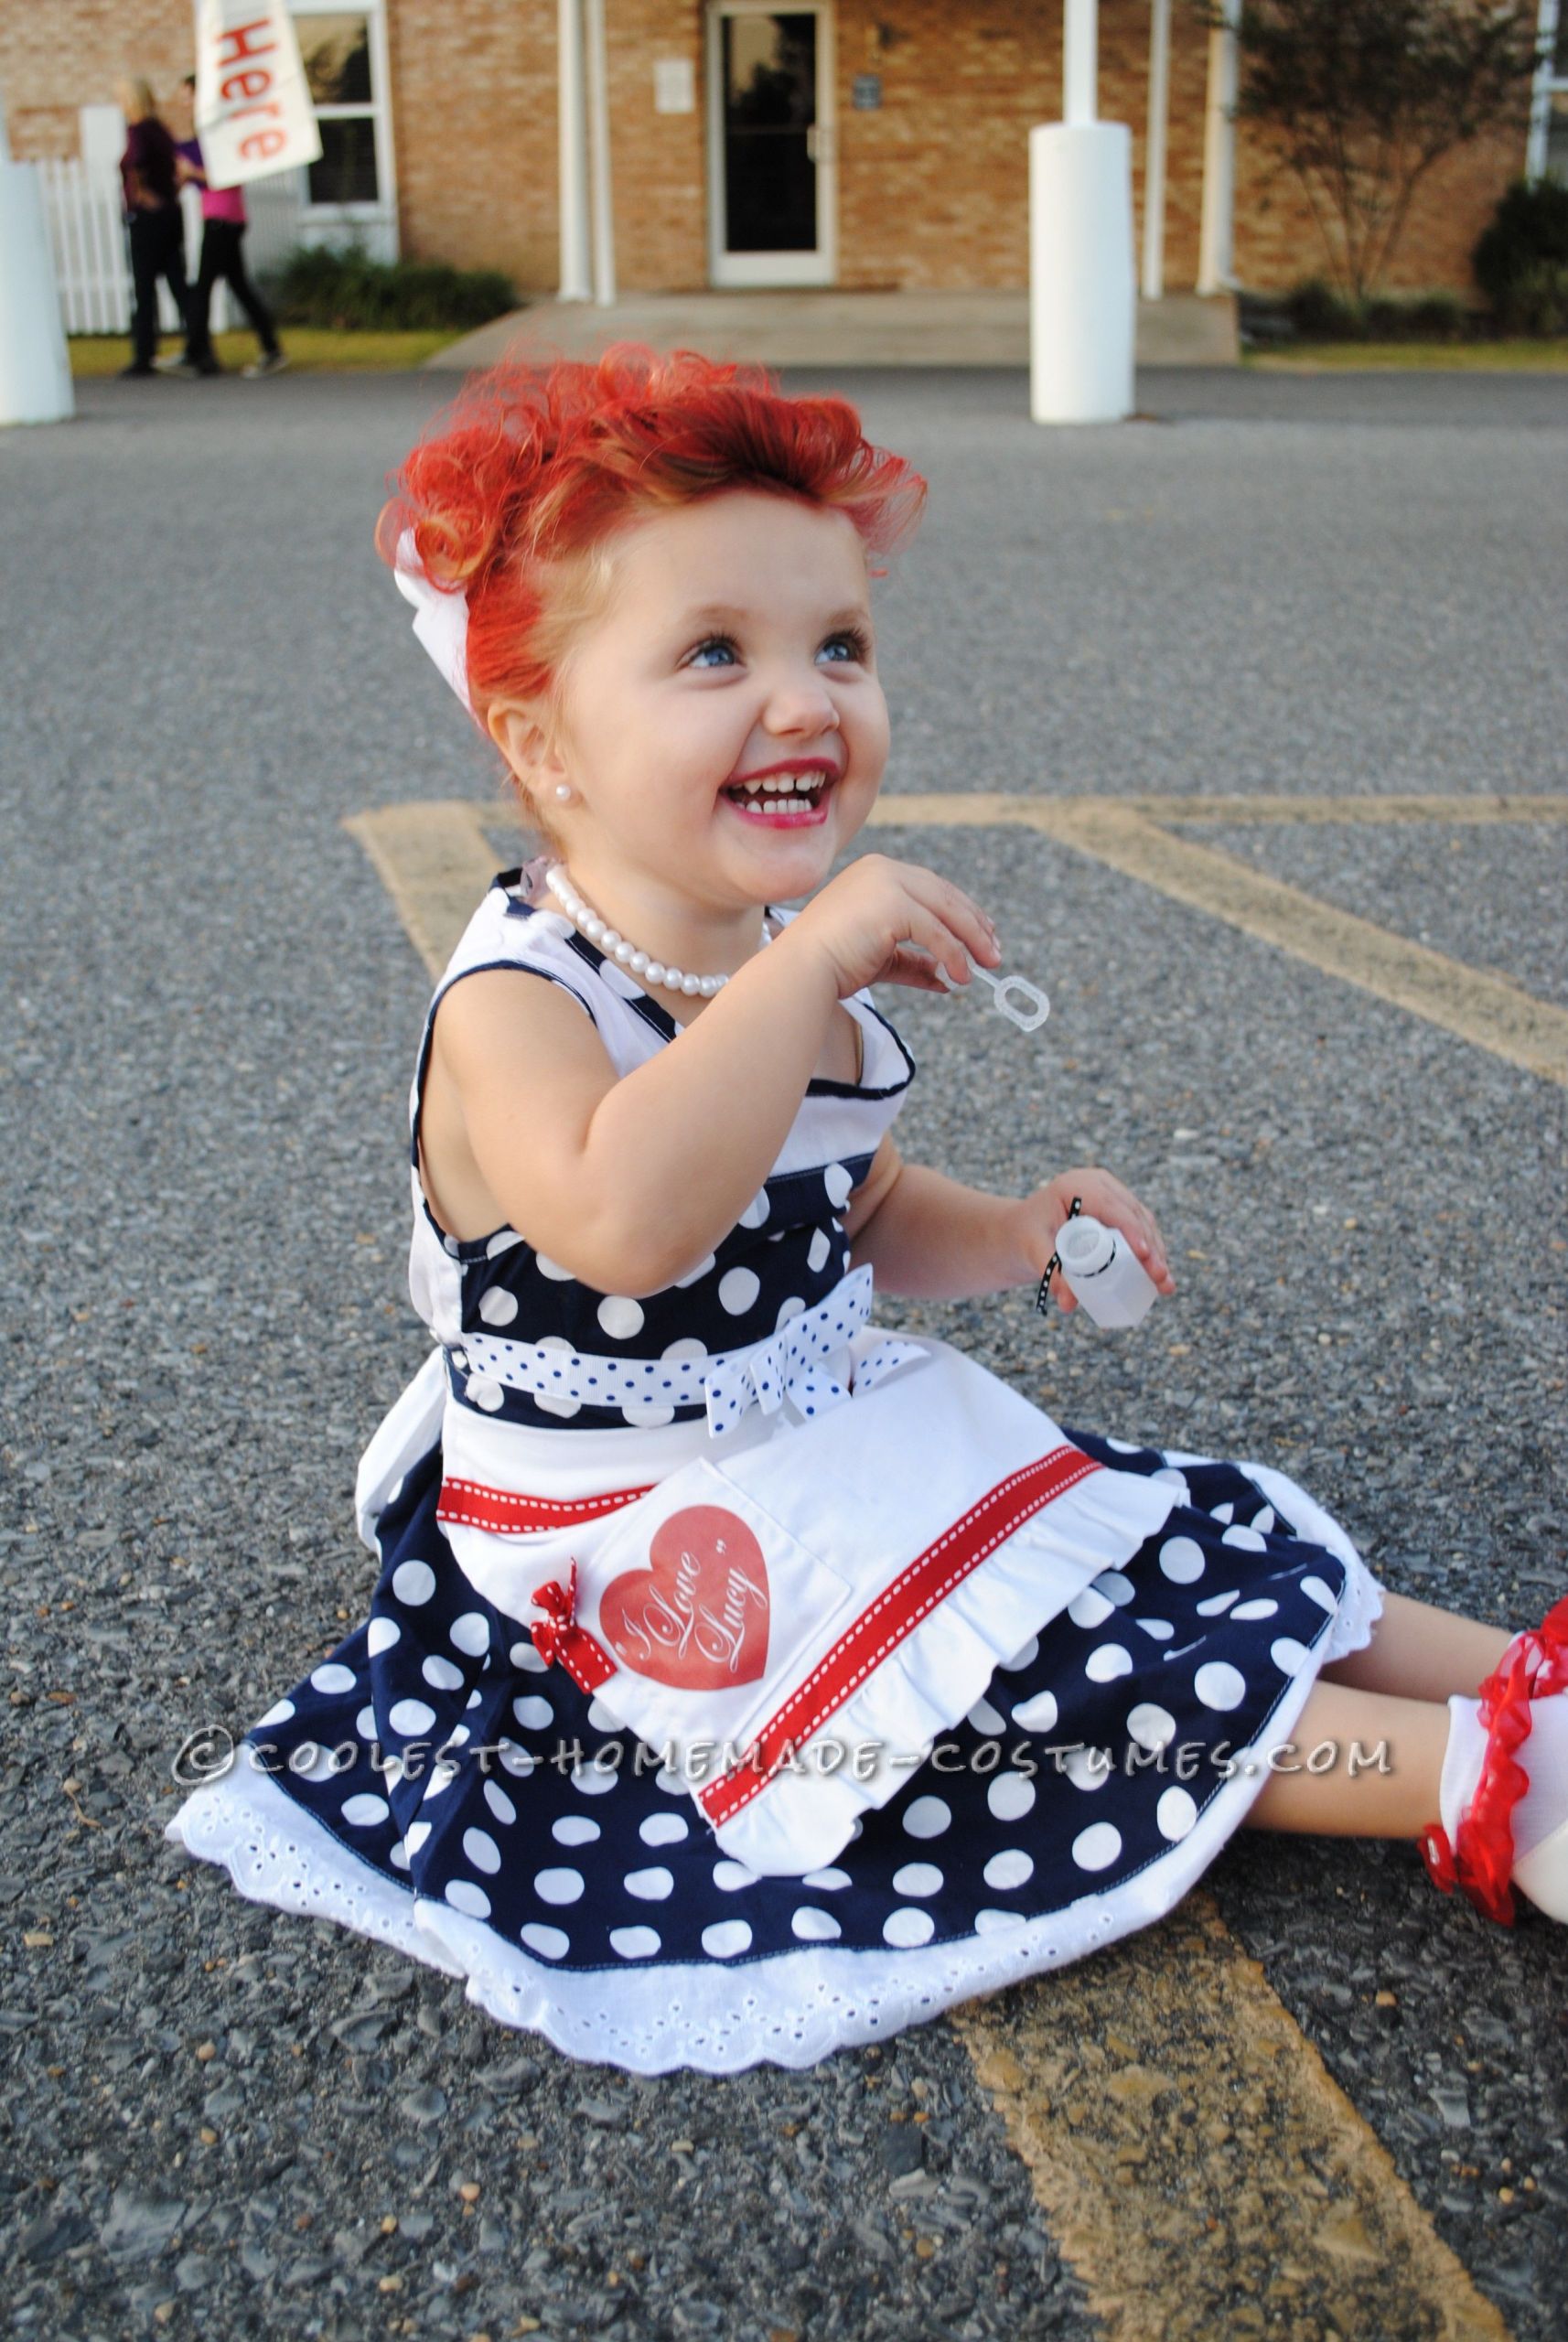 Baby Halloween Costumes Diy
 Adorable “I Love Lucy” Homemade Costume for a Toddler